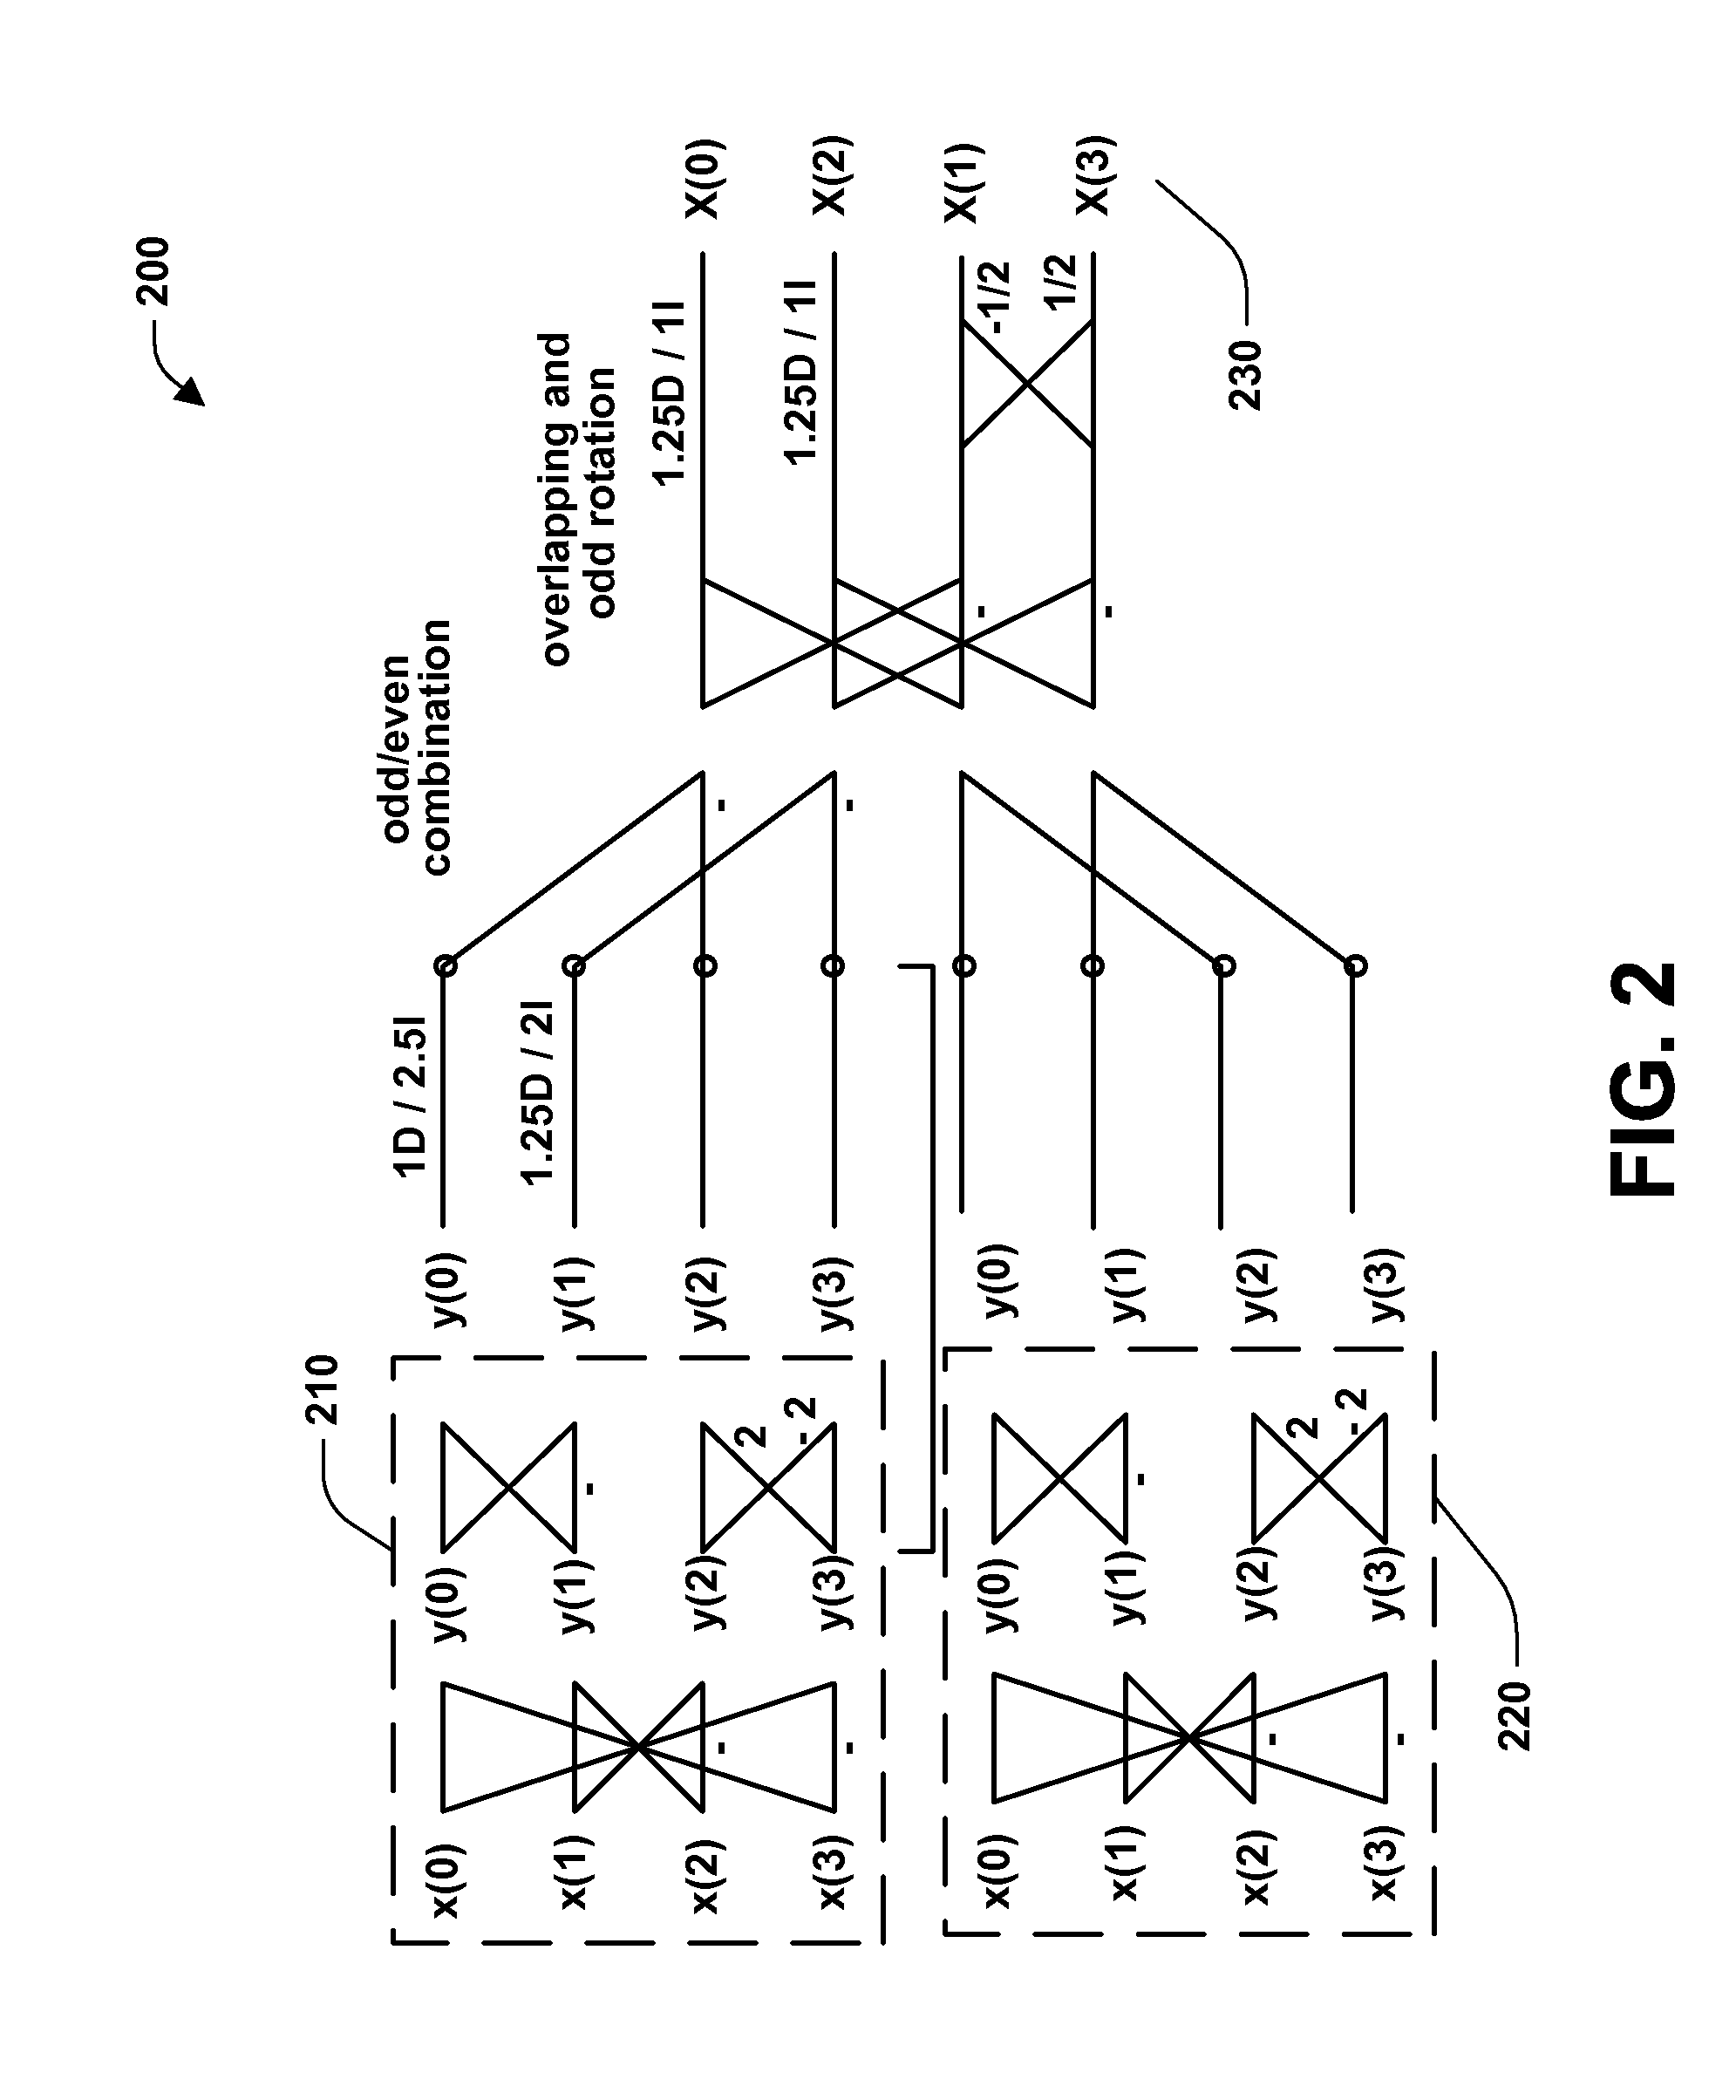 System and method for progressively transforming and coding digital data